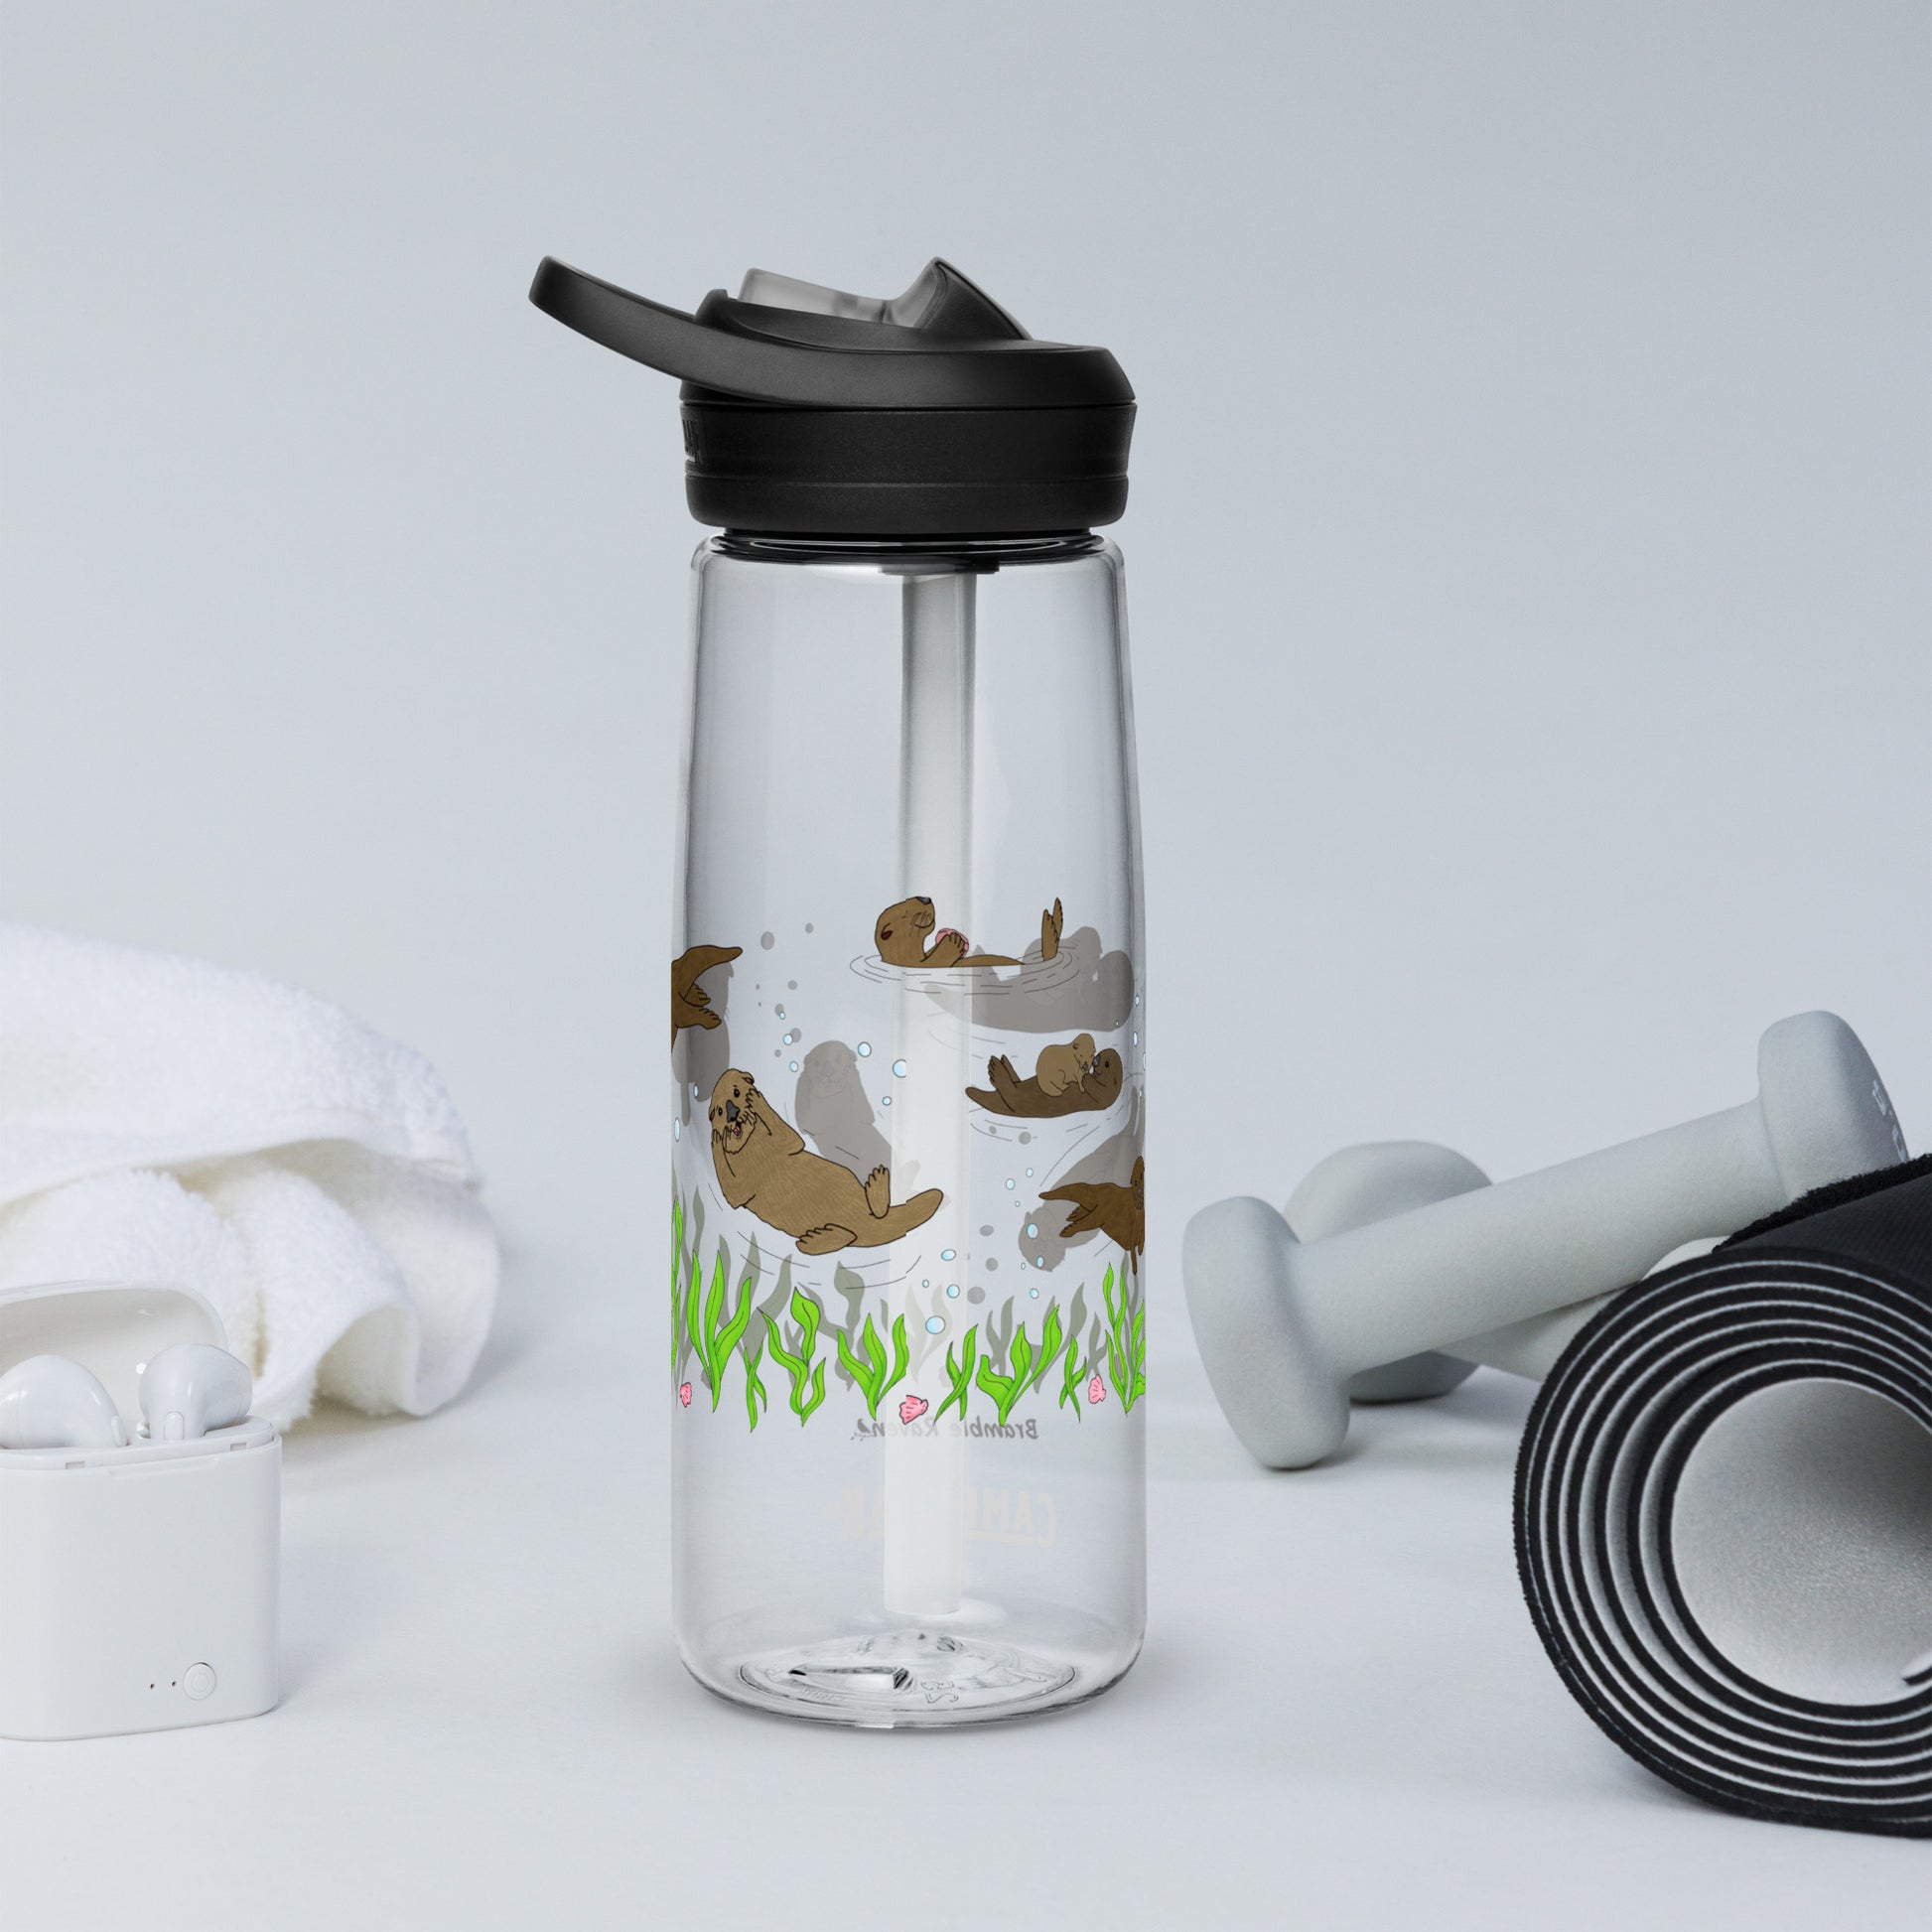 25 ounce sports water bottle with spill proof lid and bite valve. Clear stain and odor-resistant BPA-free plastic with sea otter designs around the bottle, swimming above the seaweed and shells. Shown on tabletop by yoga mat, towel, earbuds and weights.